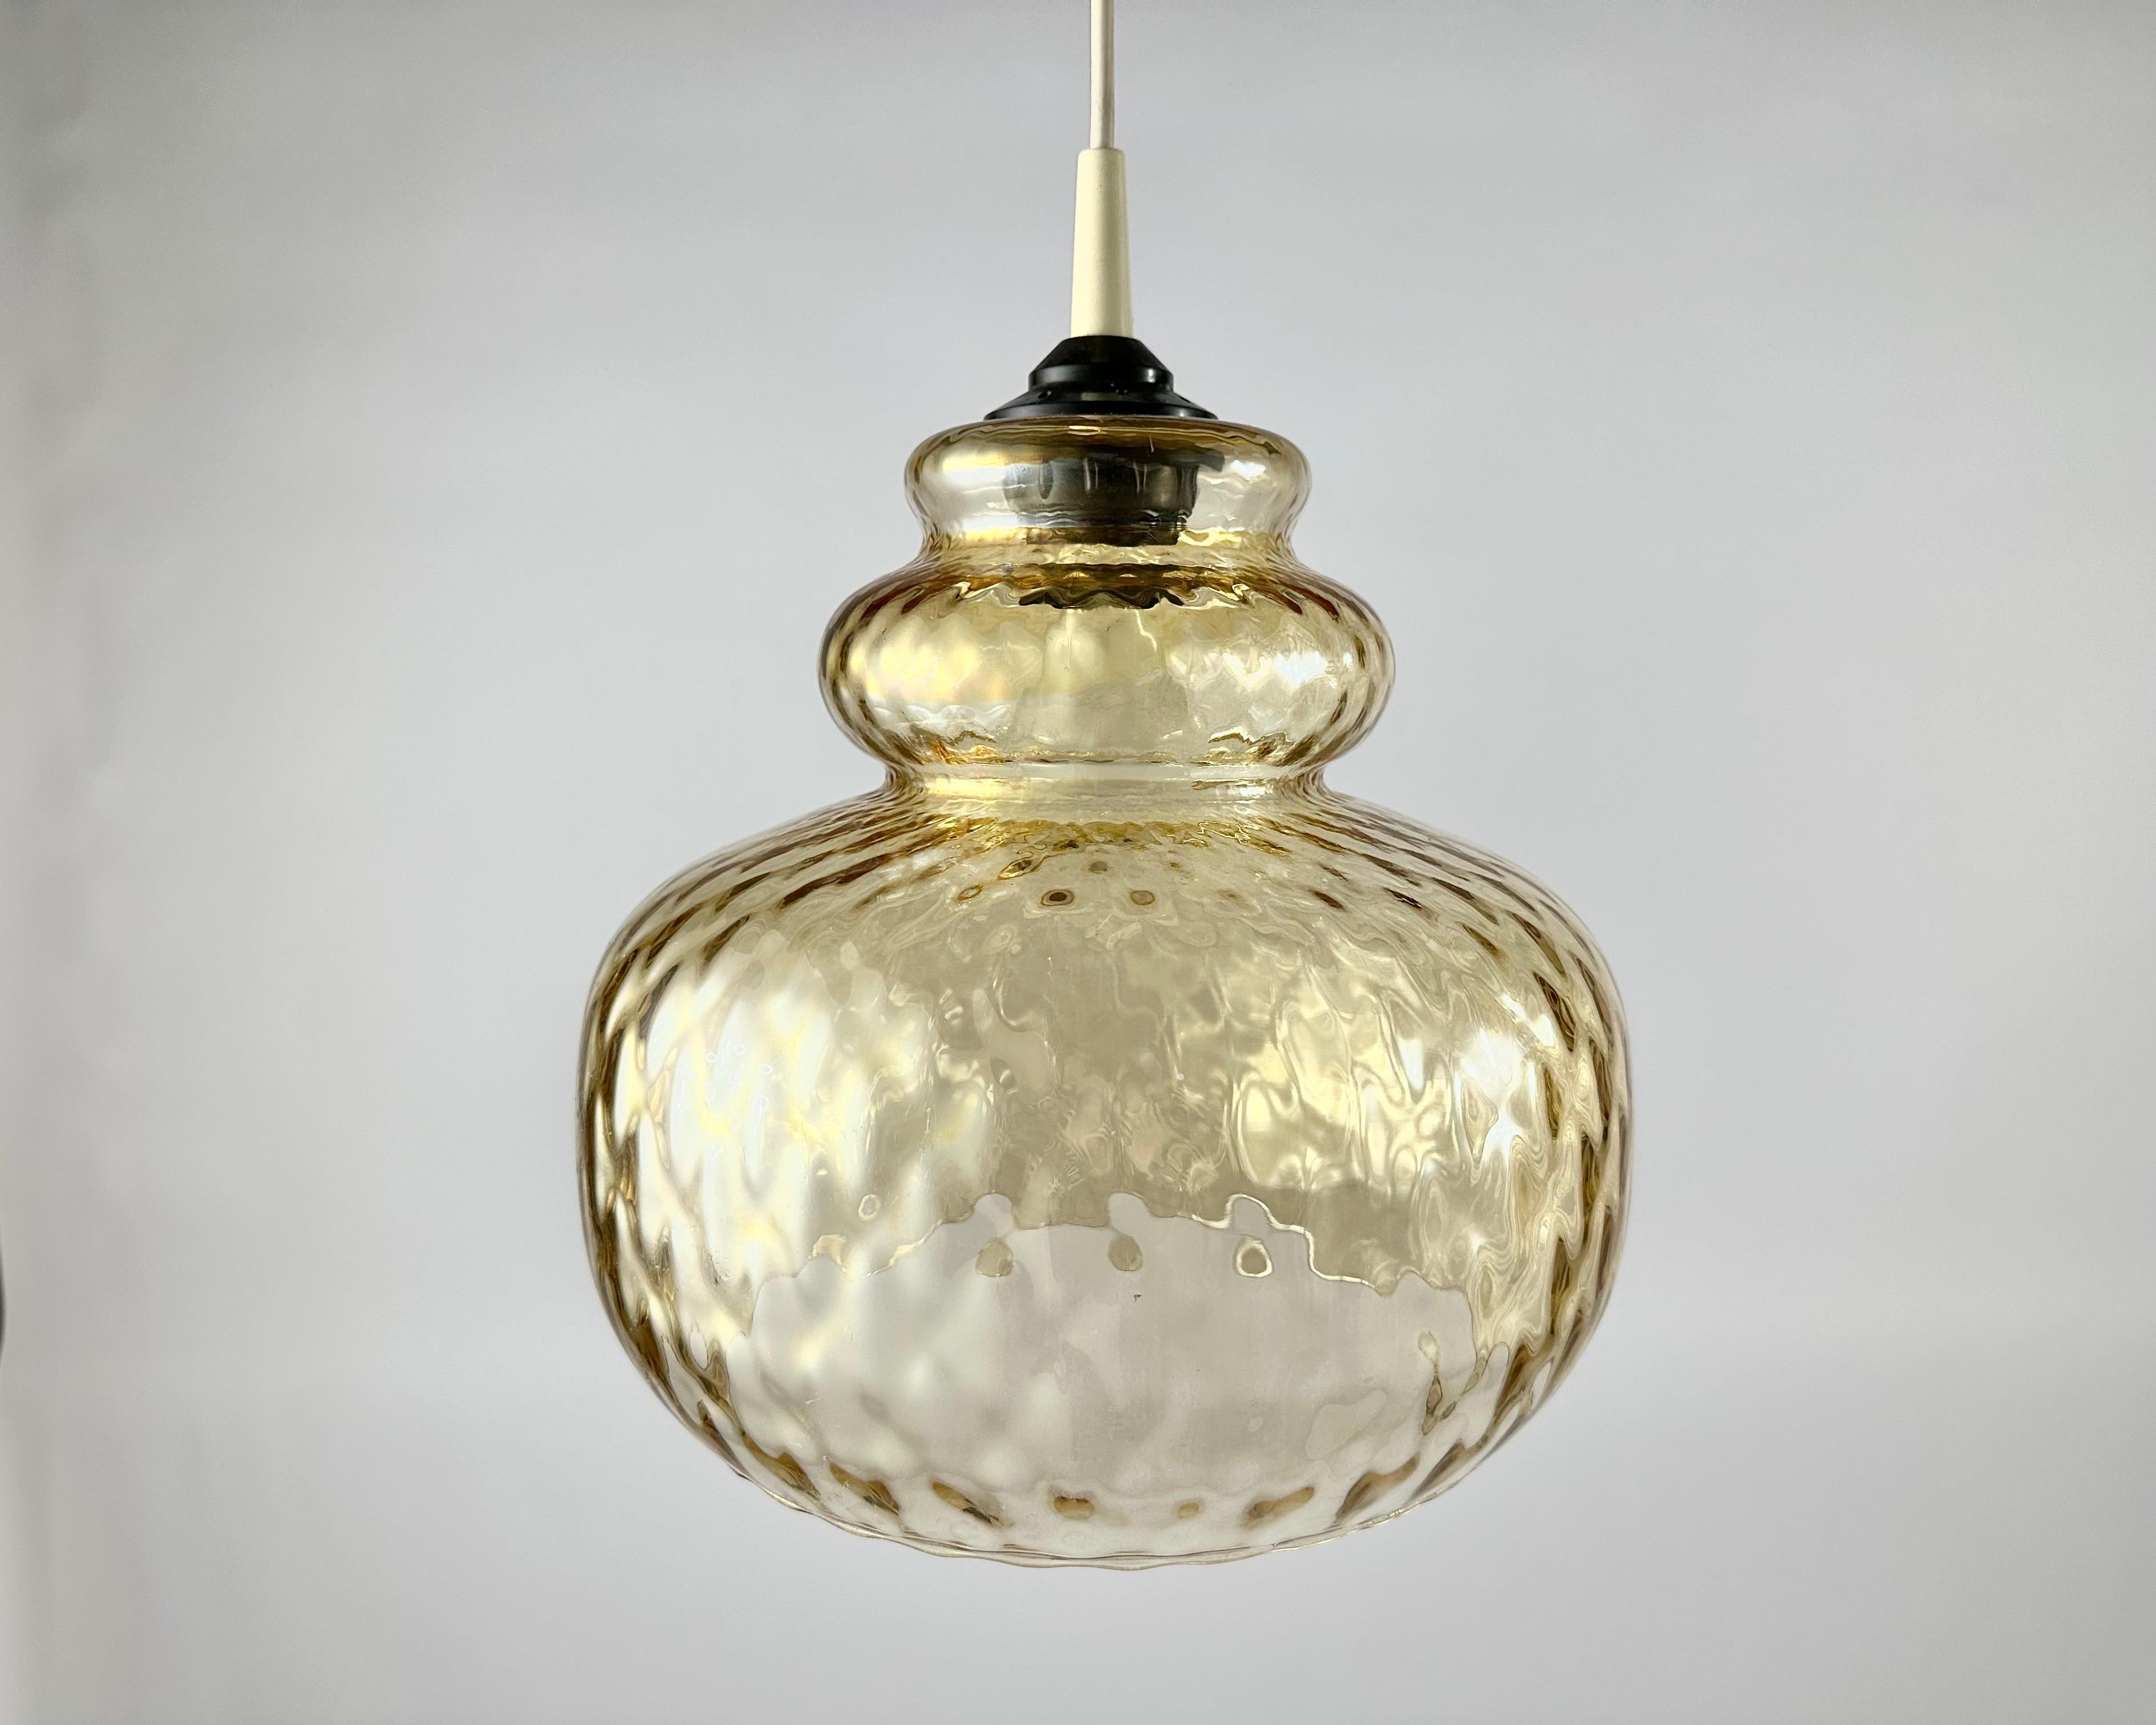 Spanish Pendant Lamps In Iridescent Glass Vintage Light Fixture Germany 1970's For Sale